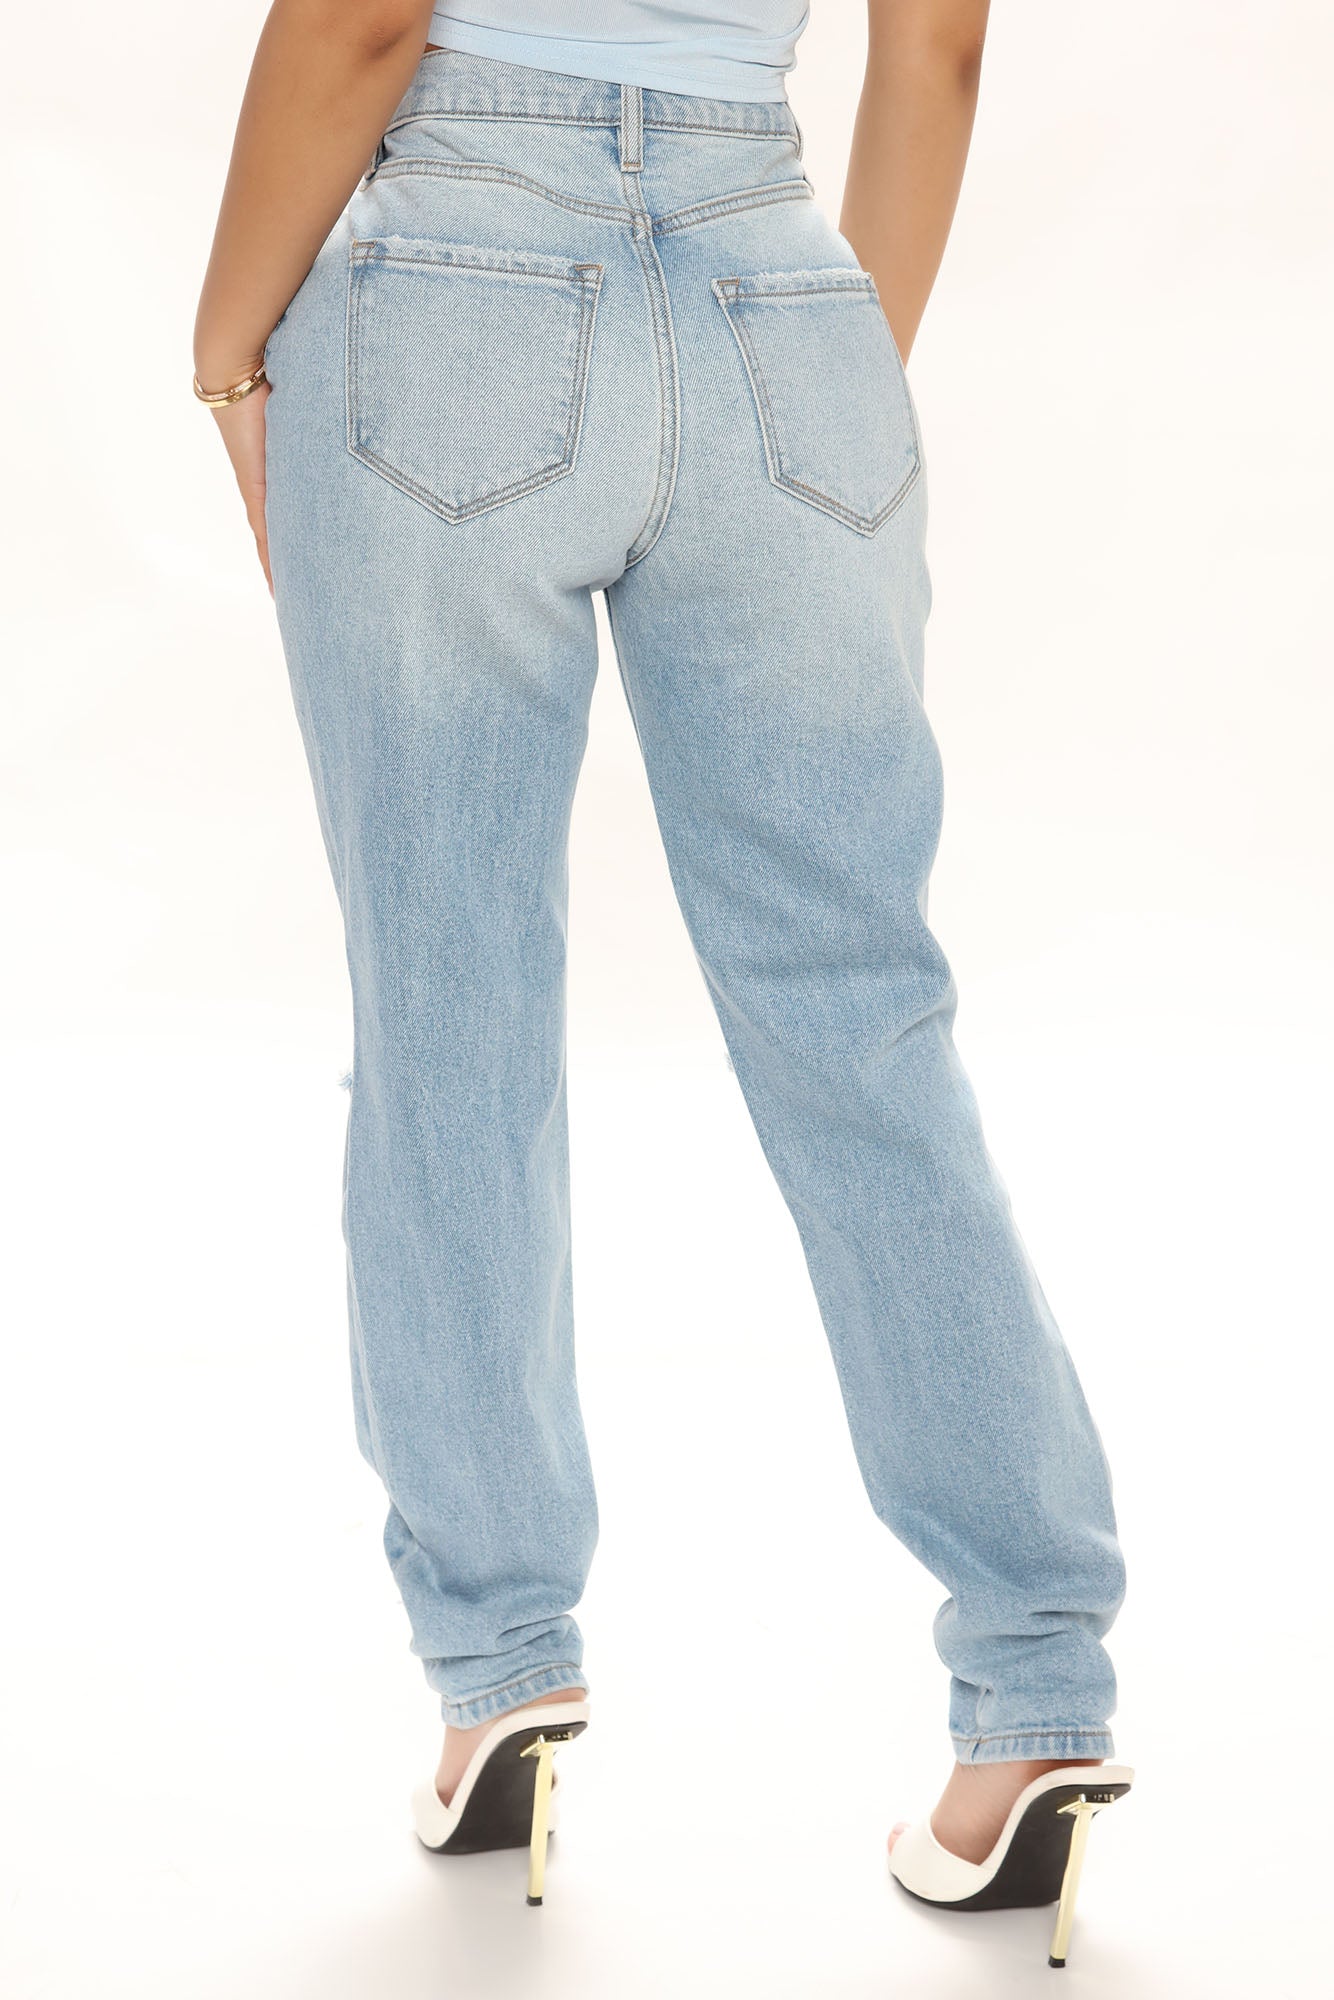 Classic Tapered Ripped Mom Jeans - Light Blue Wash